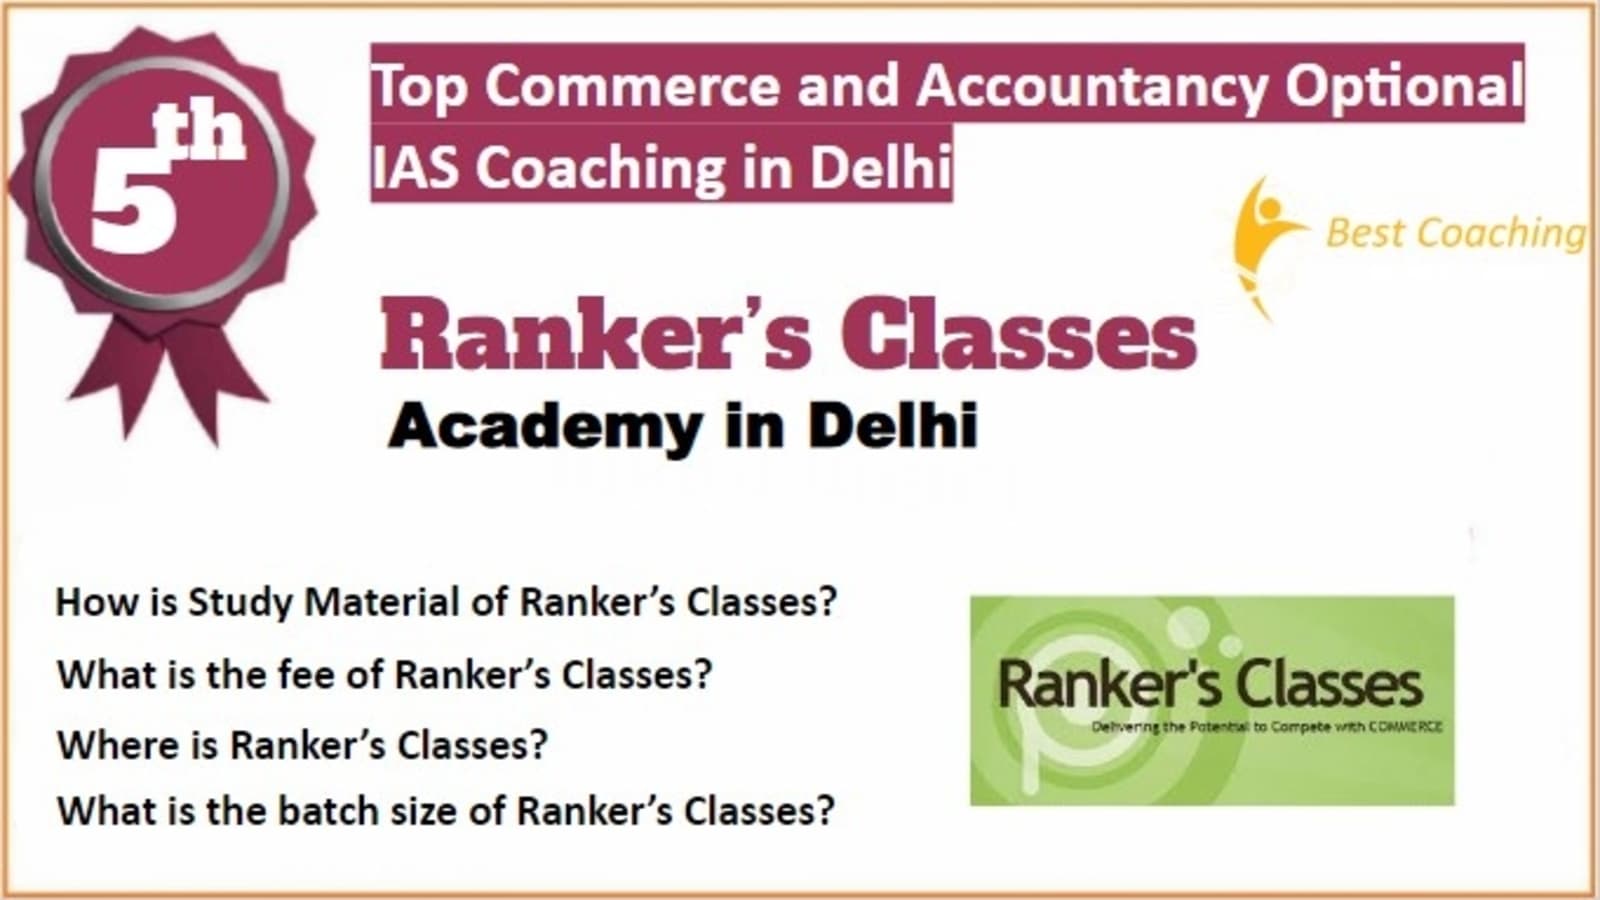 Rank 5 Best Commerce and Accountancy Optional IAS Coaching in Delhi